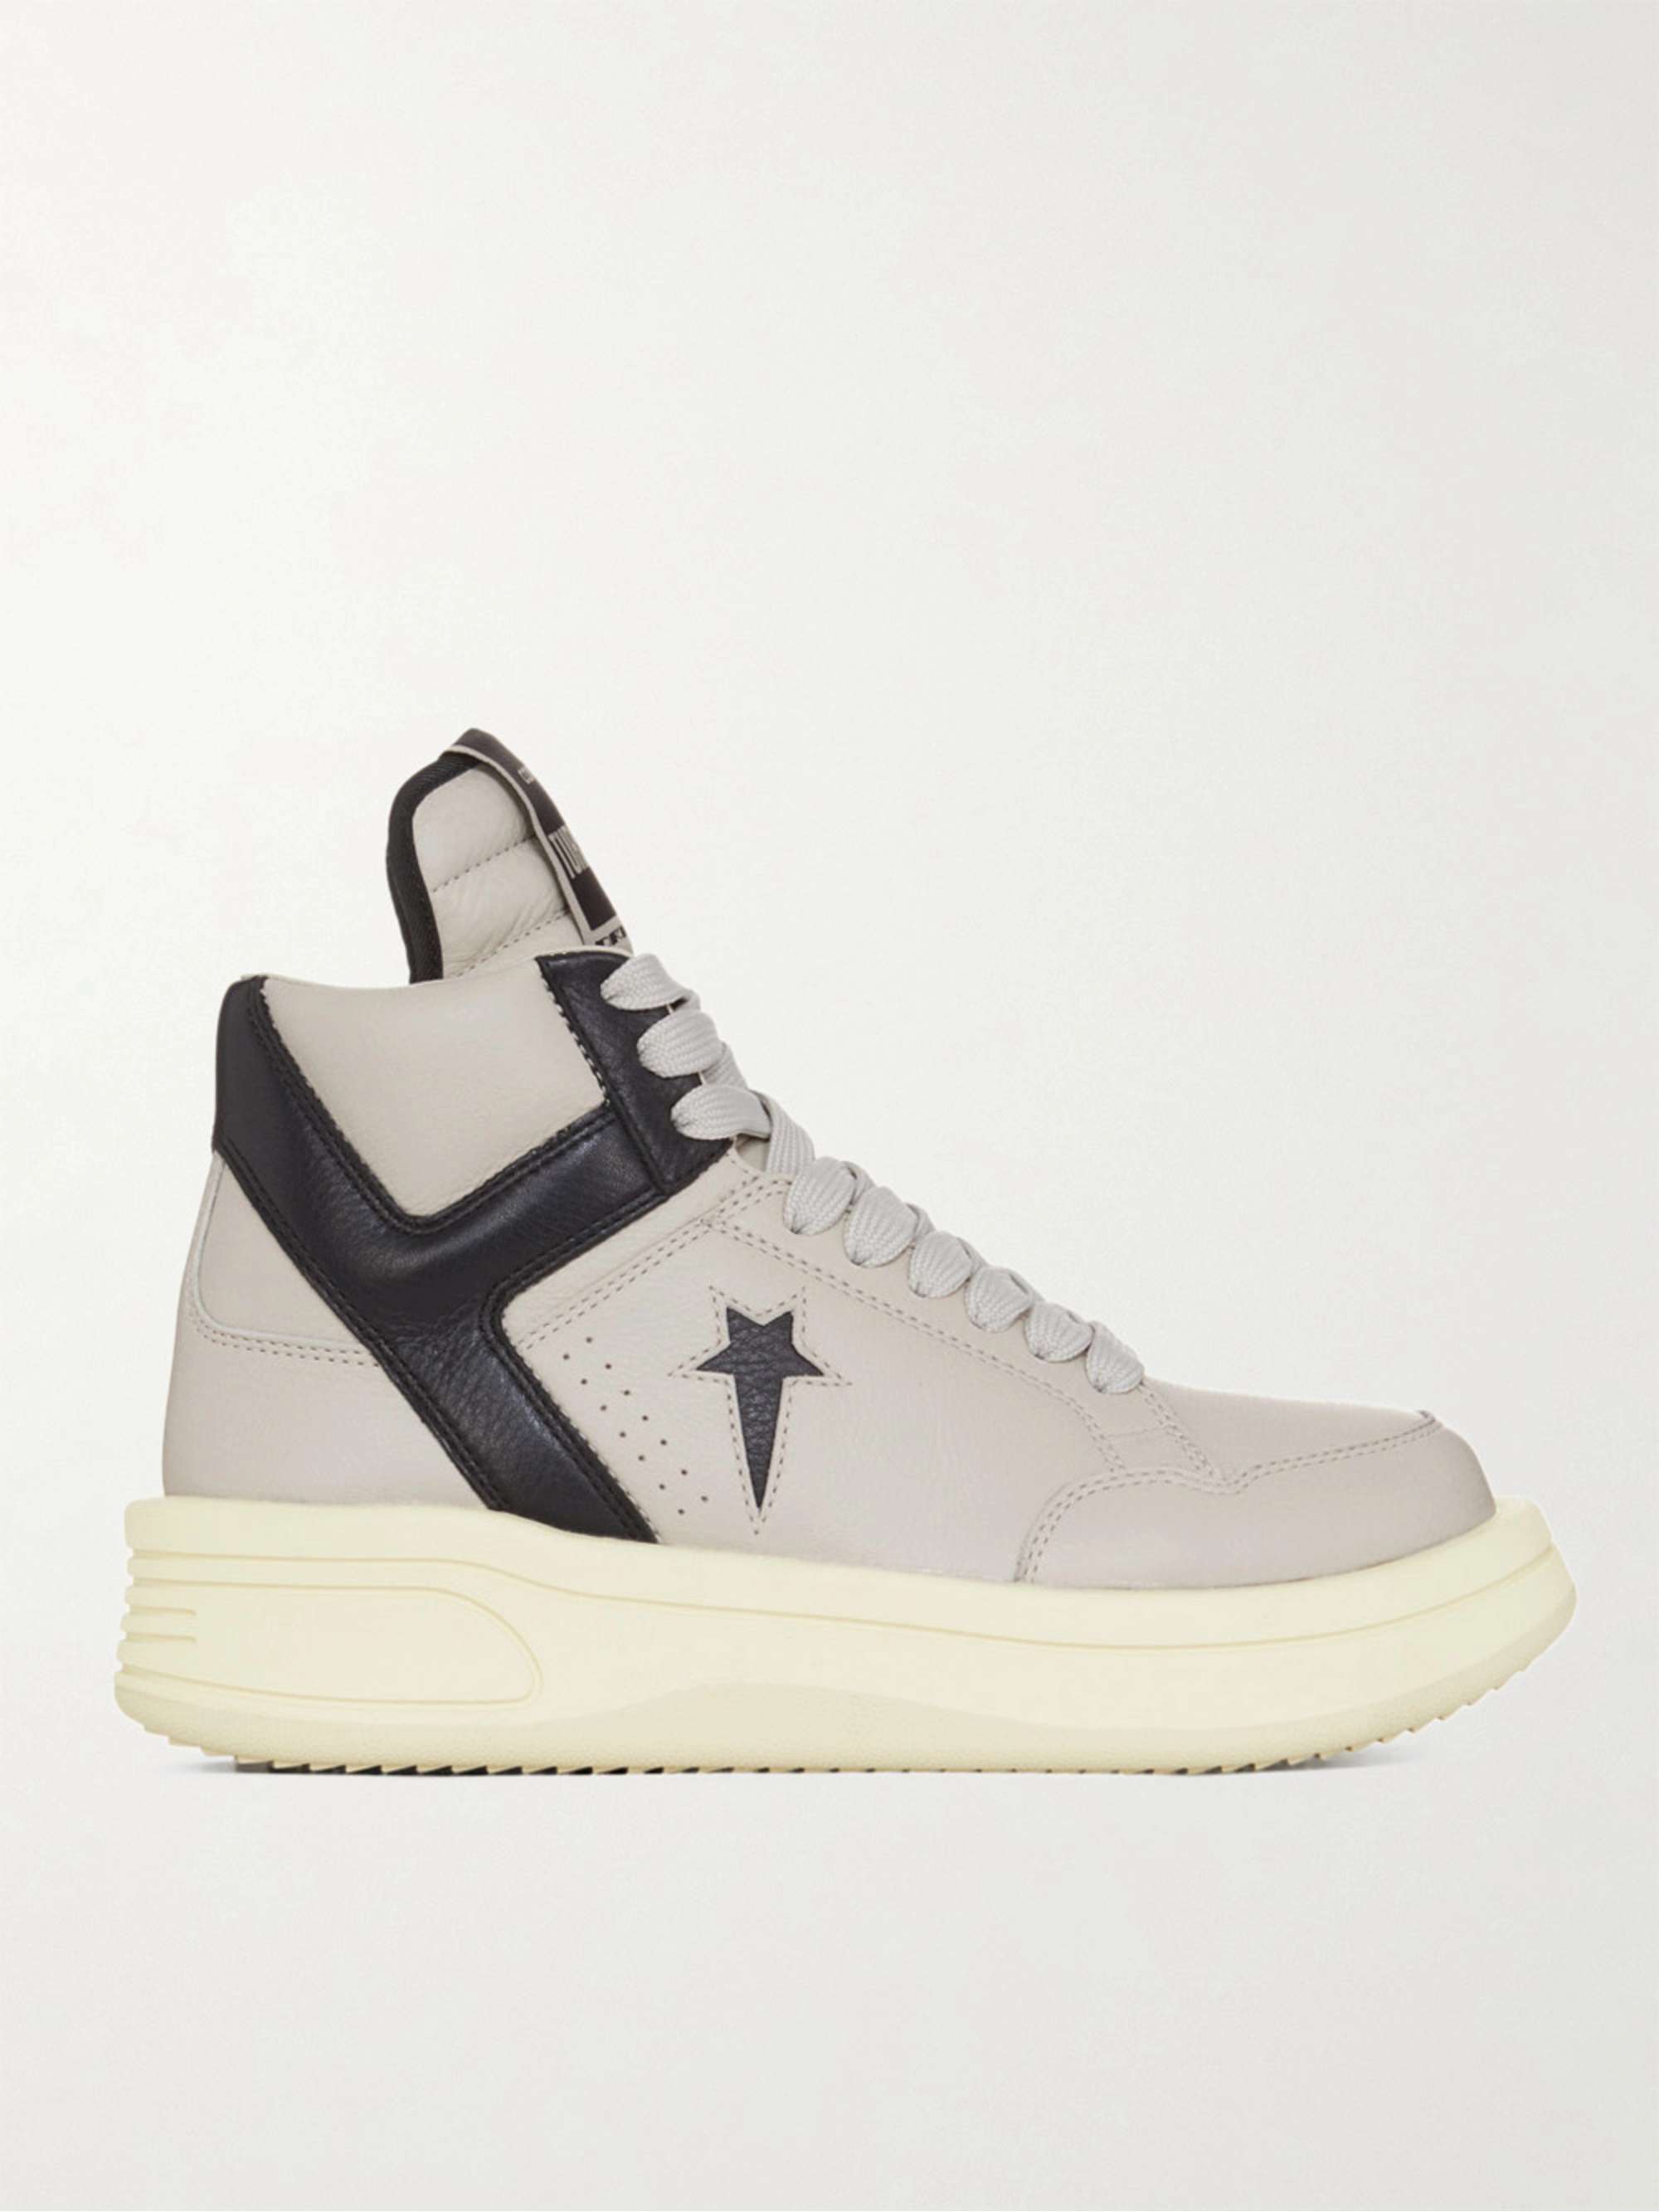 RICK OWENS + Converse Turbowpn Leather High-Top Sneakers for Men